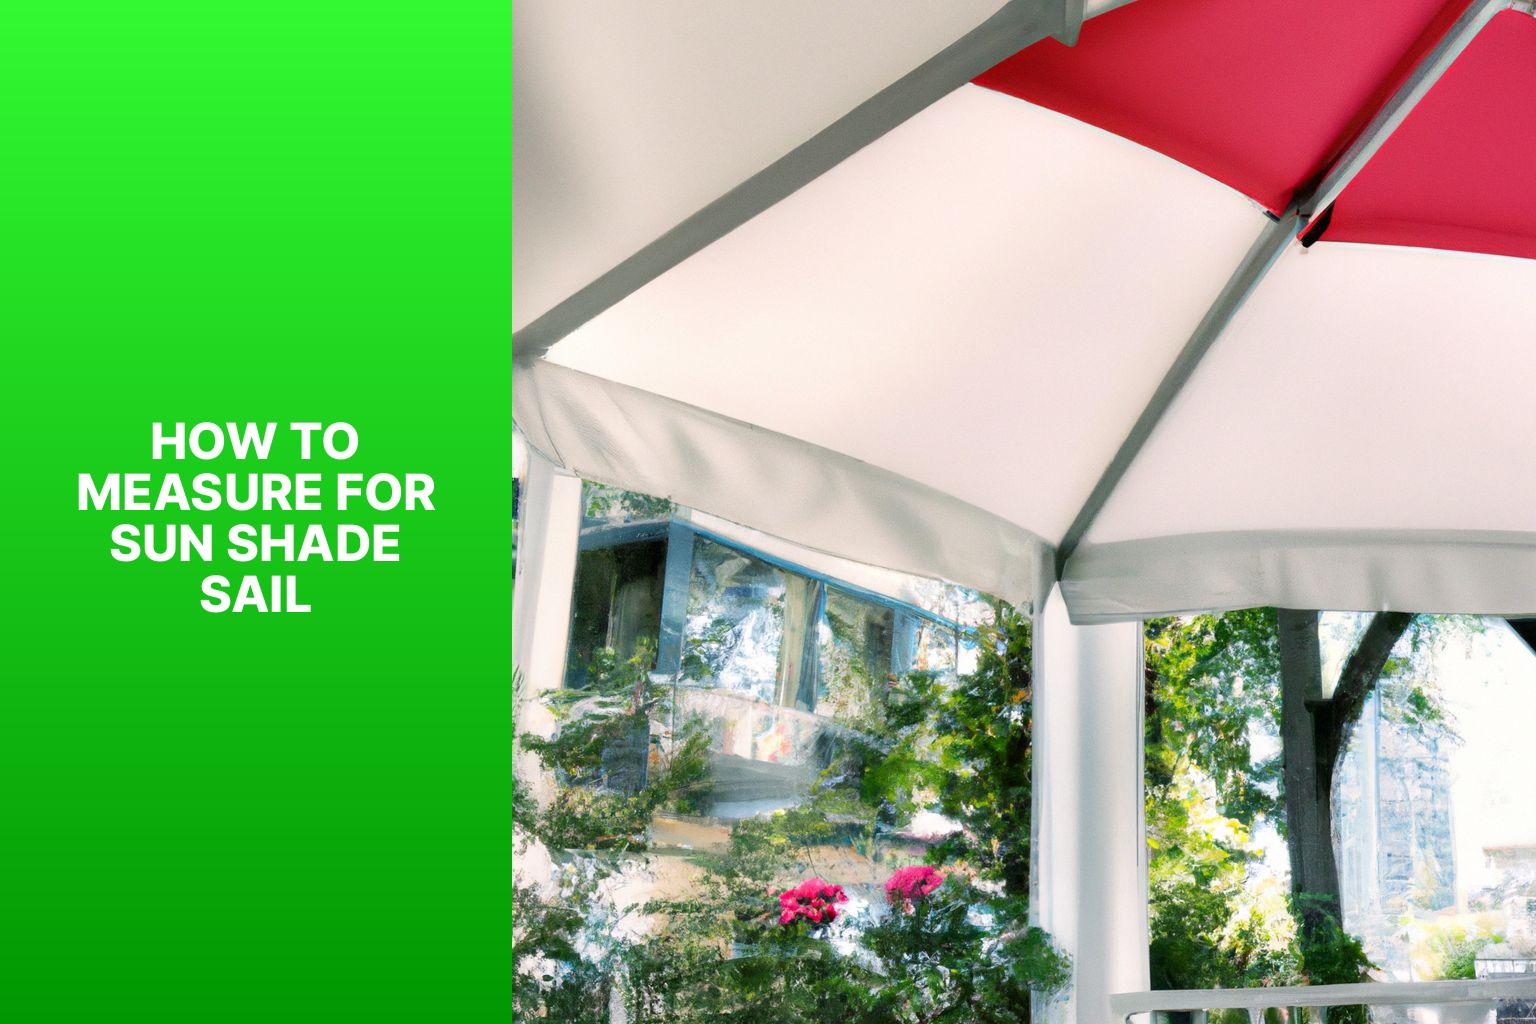 A Guide on Measuring For Sun Shade Sail- Get Accurate Dimensions Easily